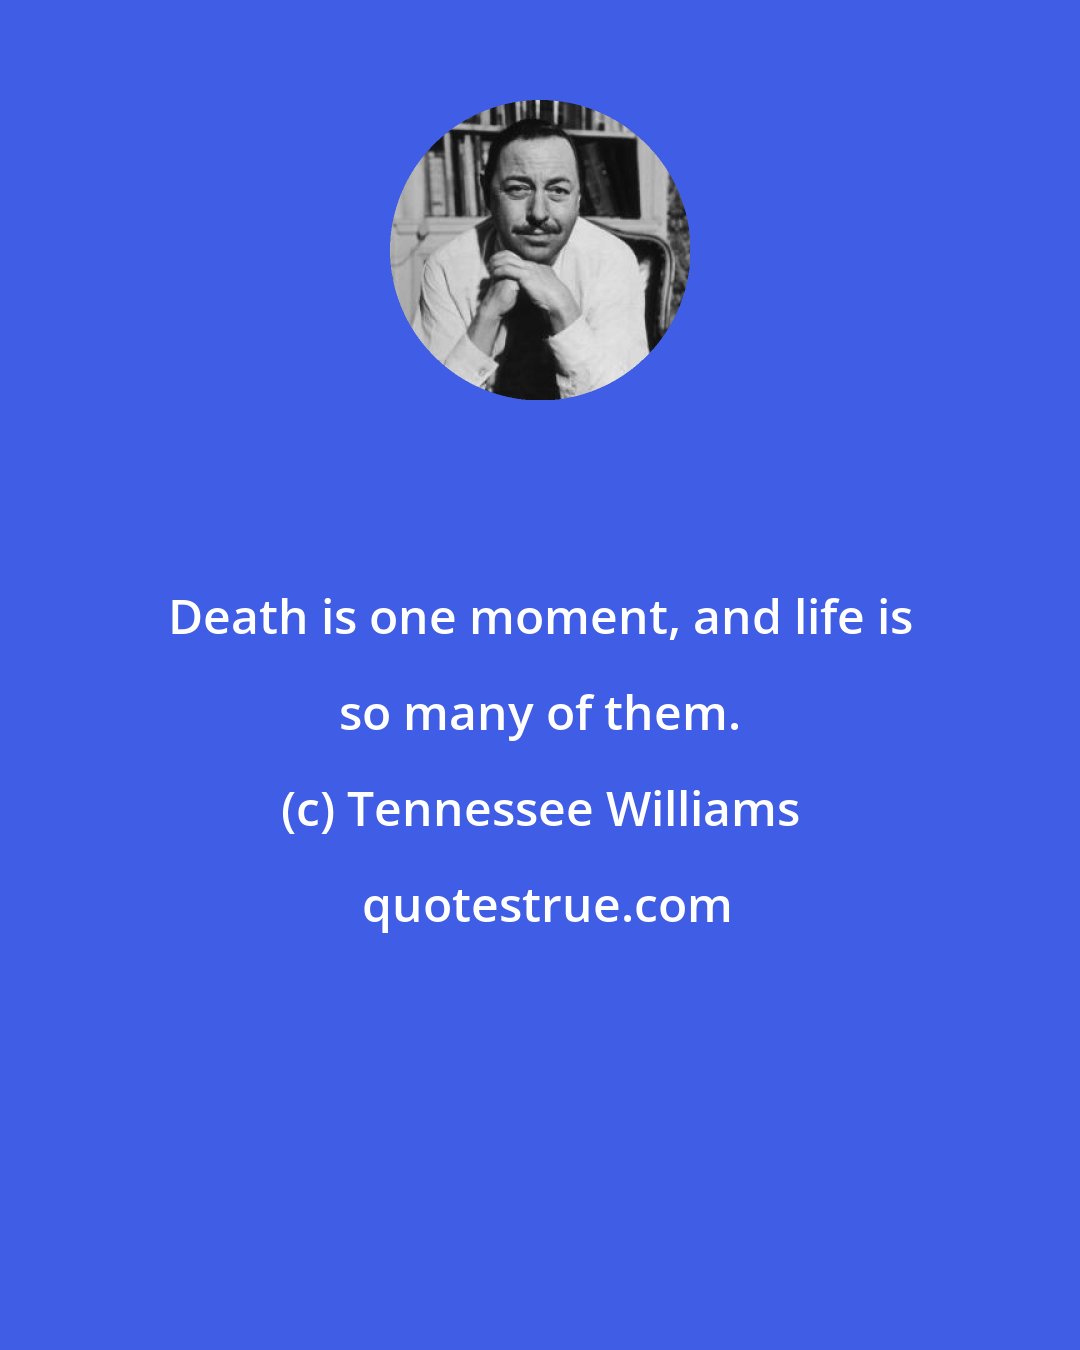 Tennessee Williams: Death is one moment, and life is so many of them.